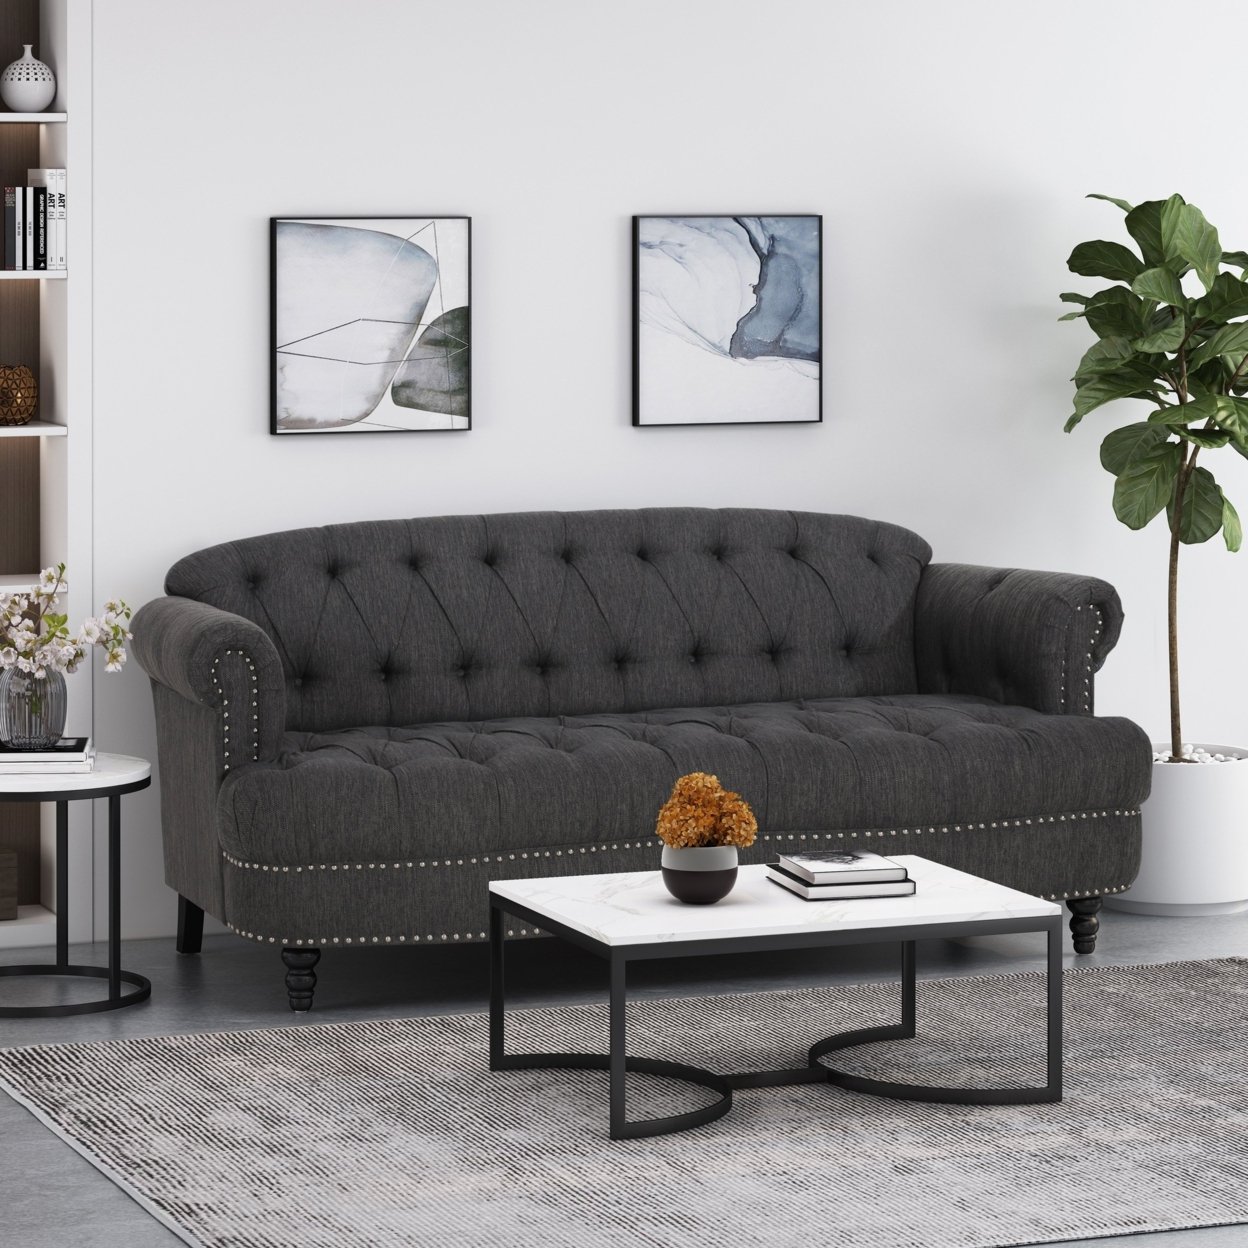 Elspeth Contemporary Deep Tufted Sofa With Nailhead Trim - Dark Brown/charcoal